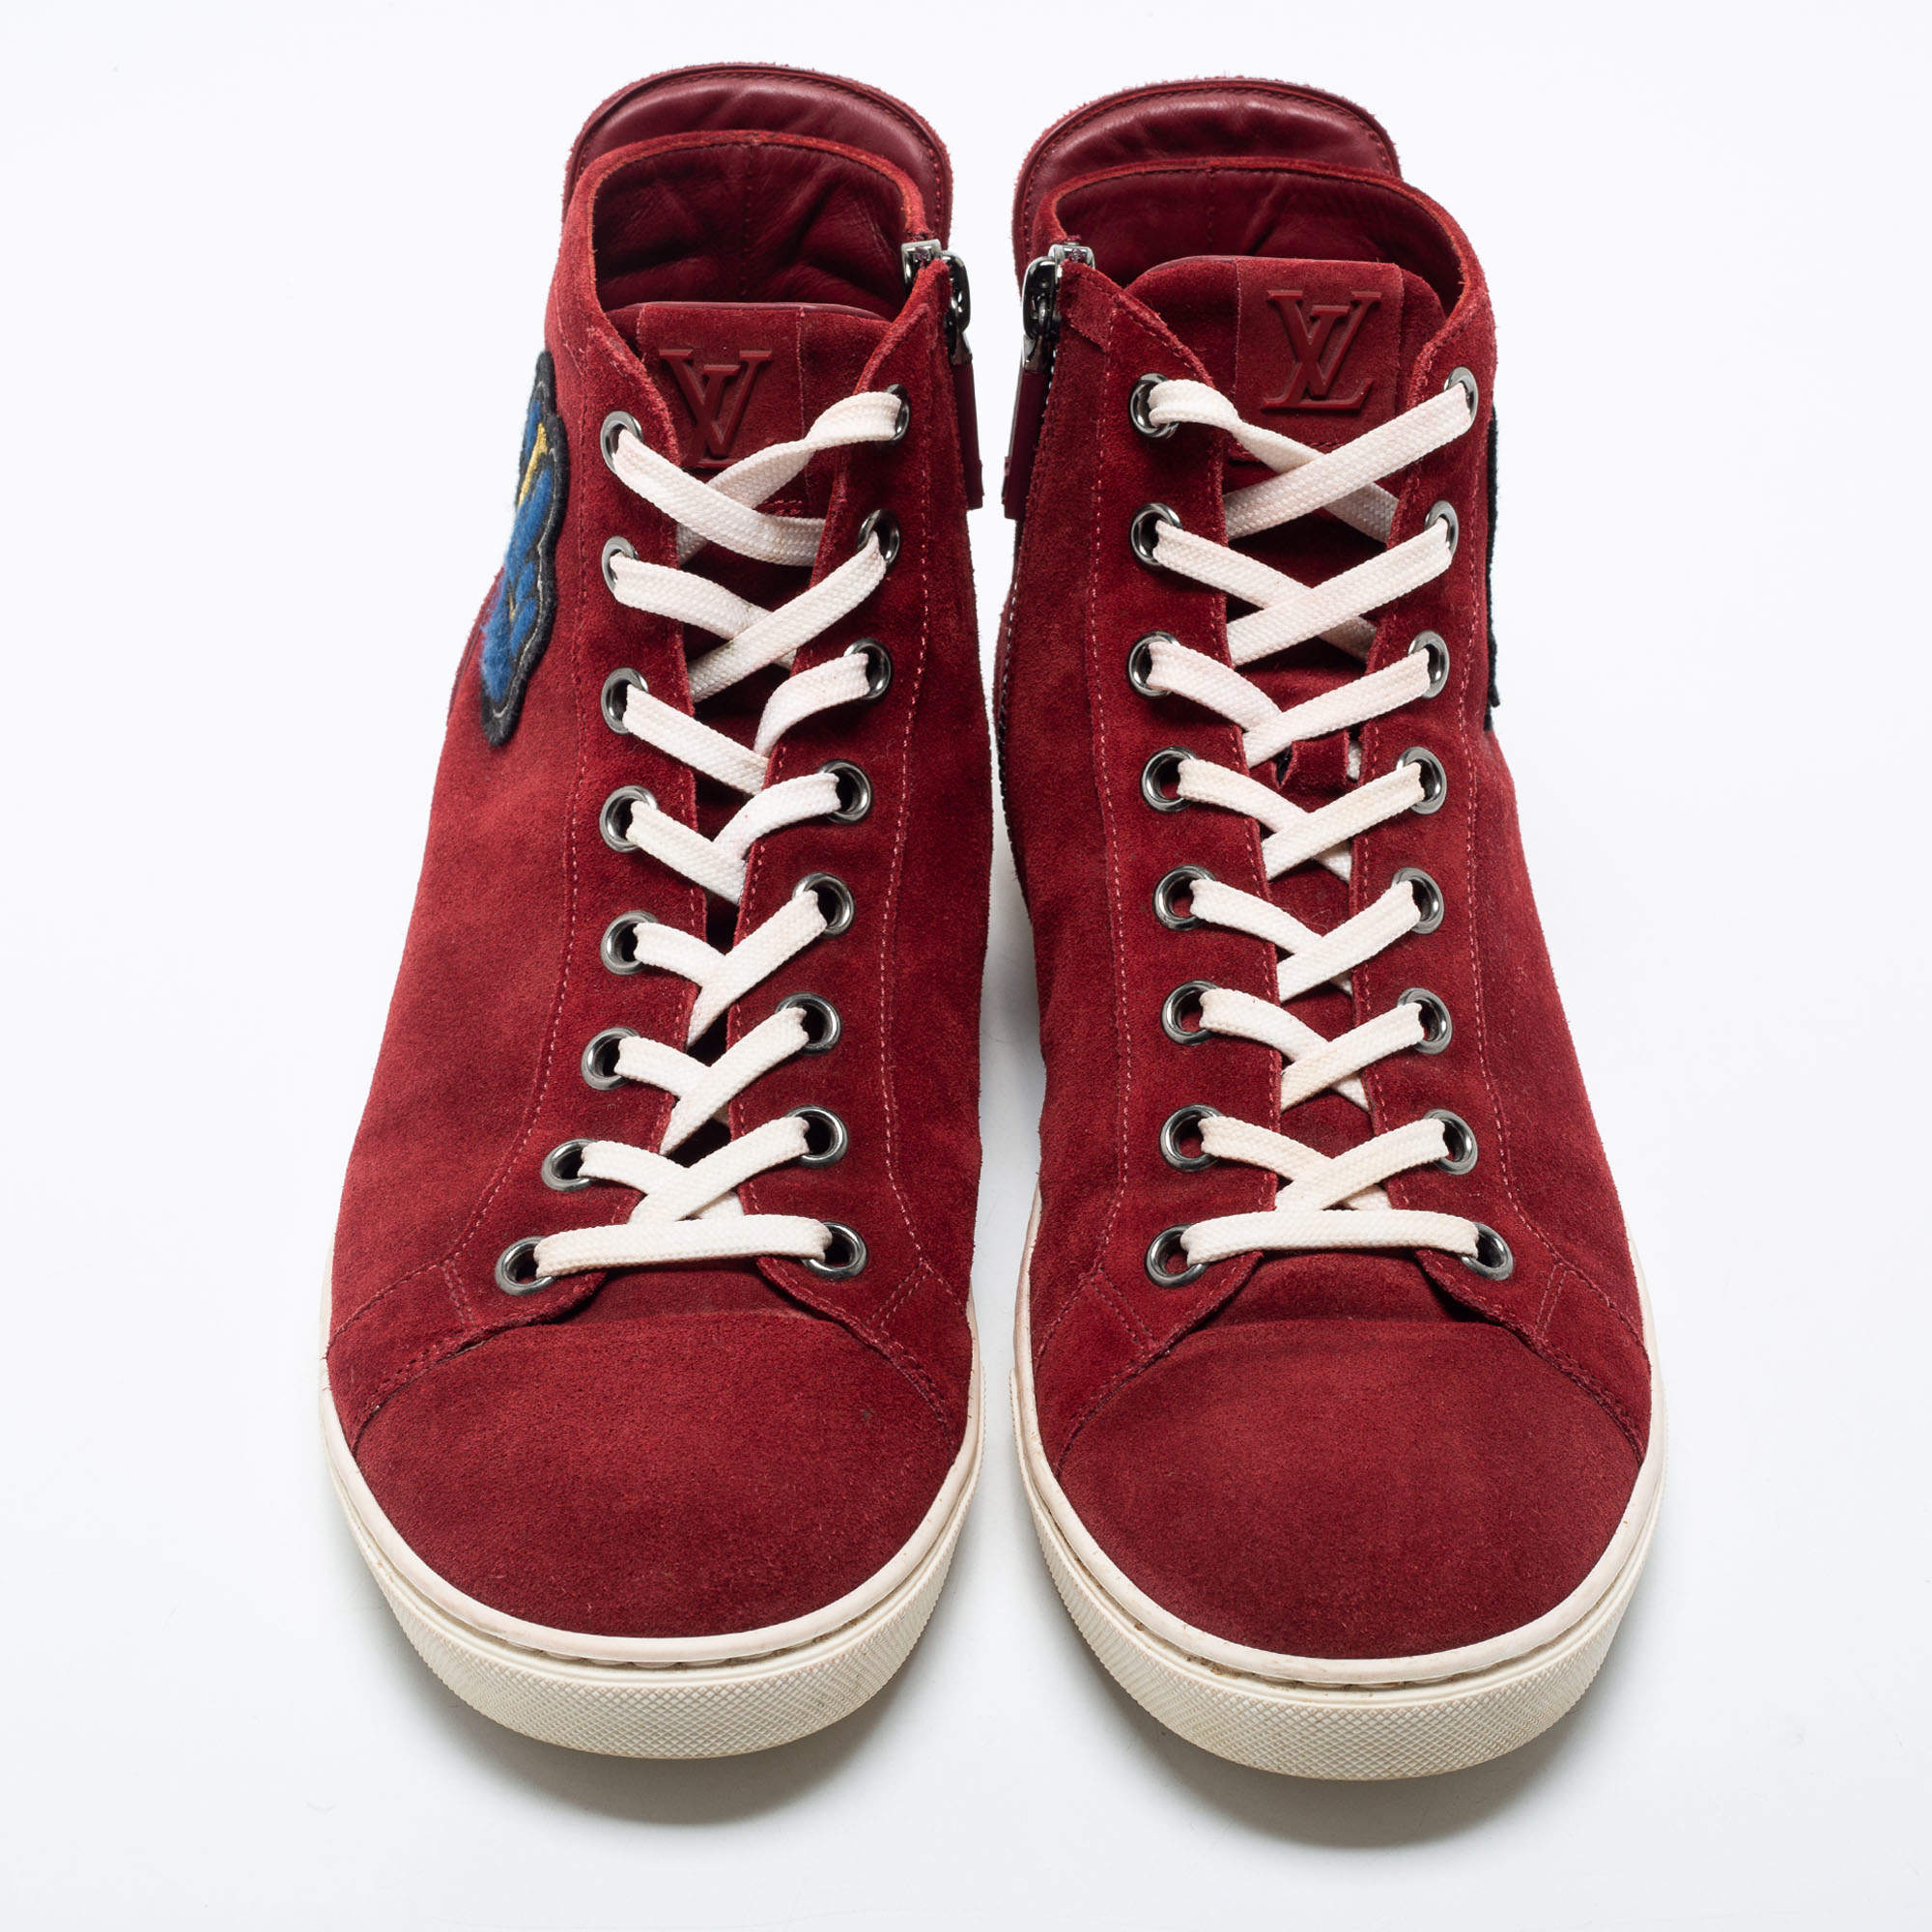 Louis Vuitton Red Suede High Top Sneakers Size 43 Louis Vuitton